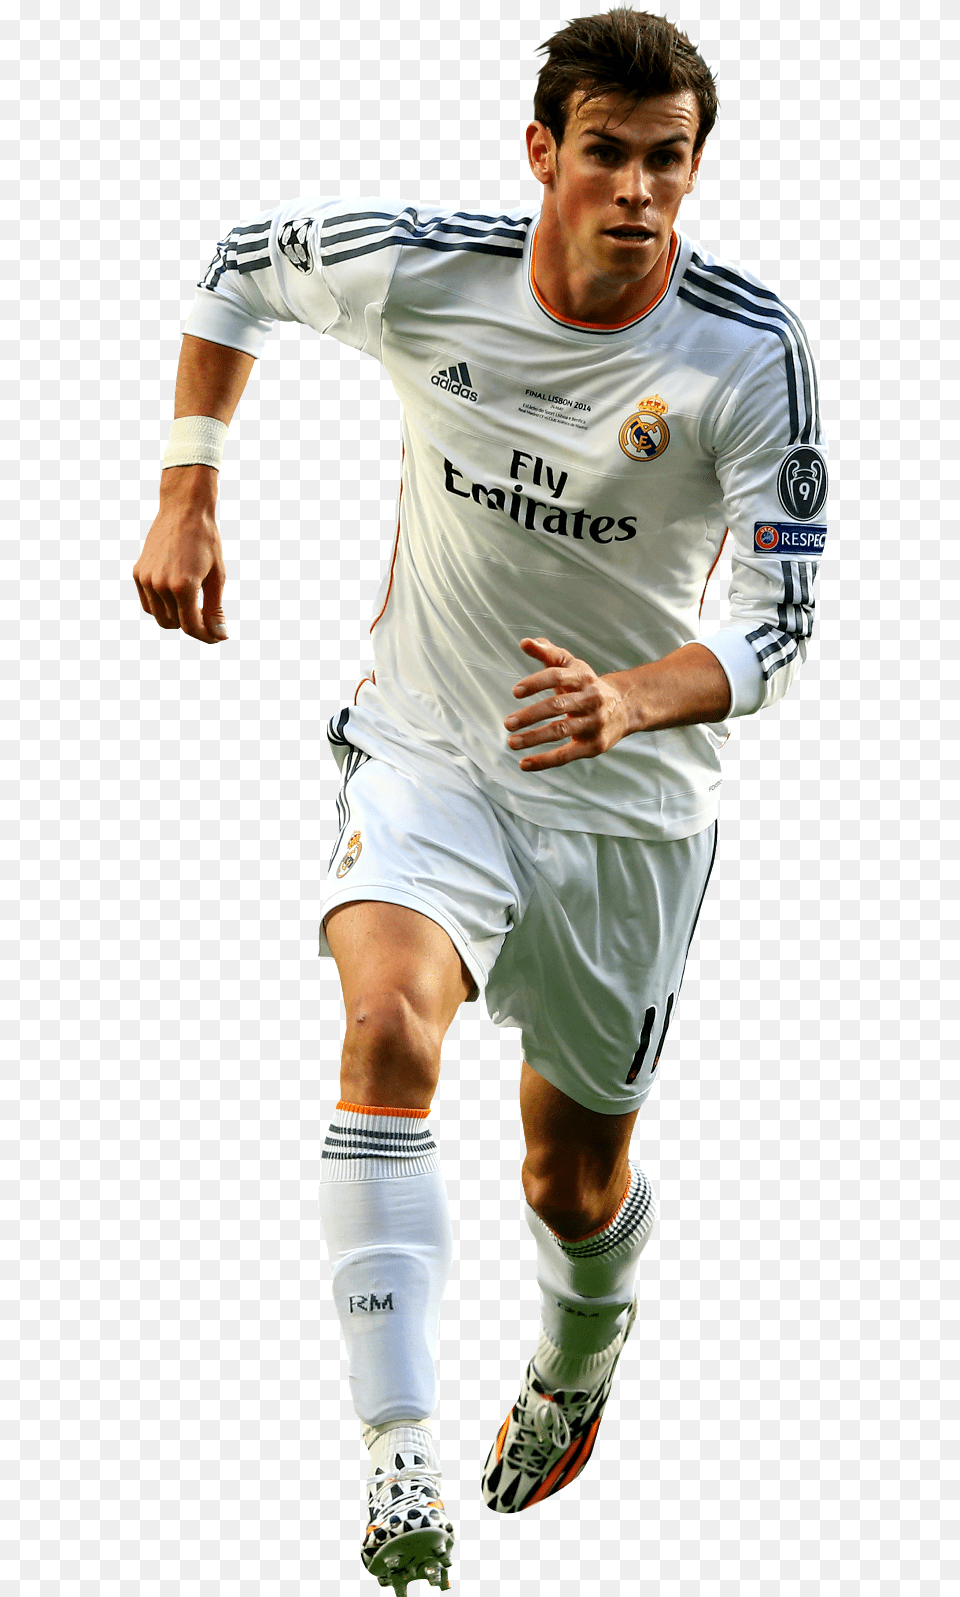 Gareth Bale Of Real Madrid In The 2014 Champions League Bale Real Madrid Love, Body Part, Shorts, Clothing, Shoe Png